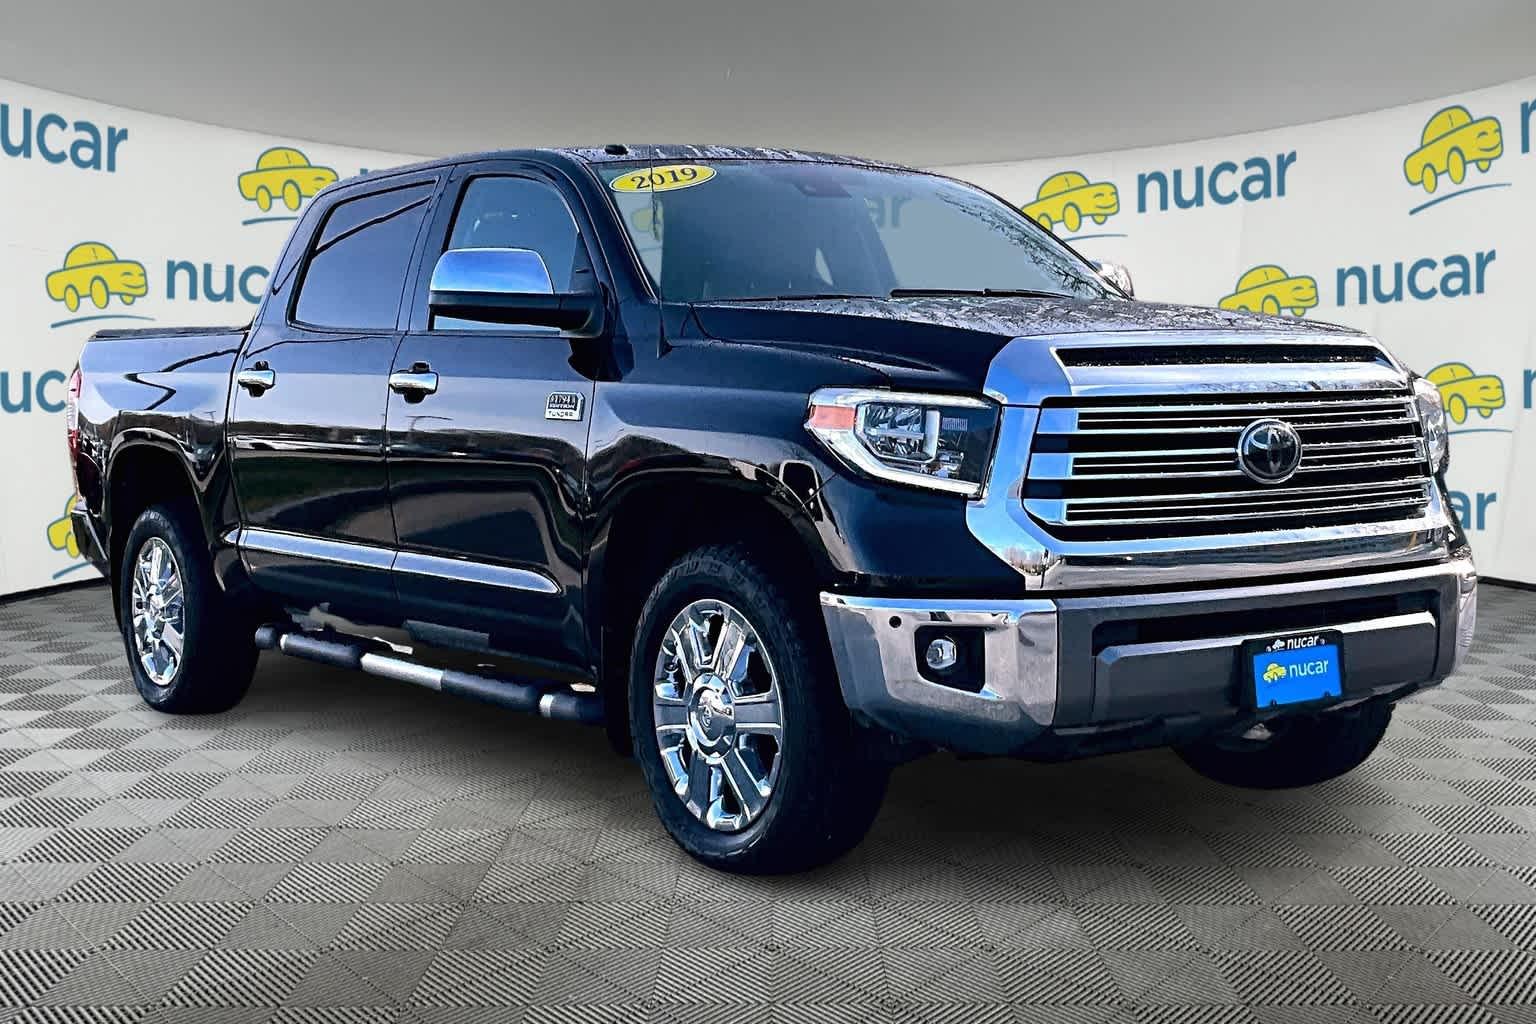 2019 Toyota Tundra 1794 Edition CrewMax 5.5 Bed 5.7L